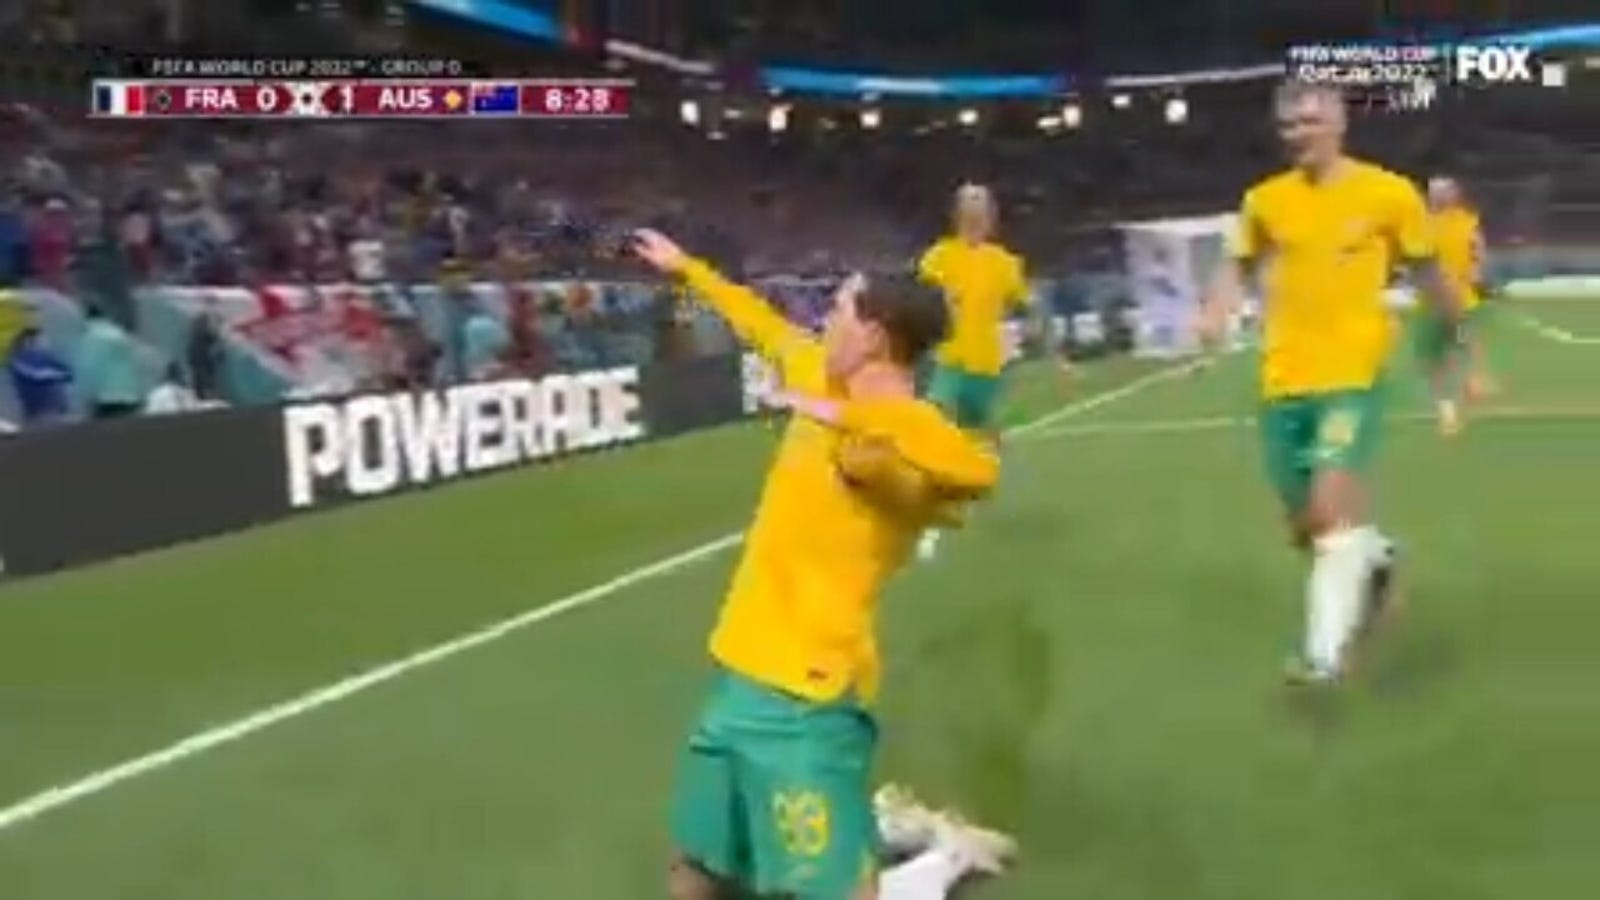 Craig Goodwin strikes early in the 9th minute, giving Australia a 1-0 lead in France 